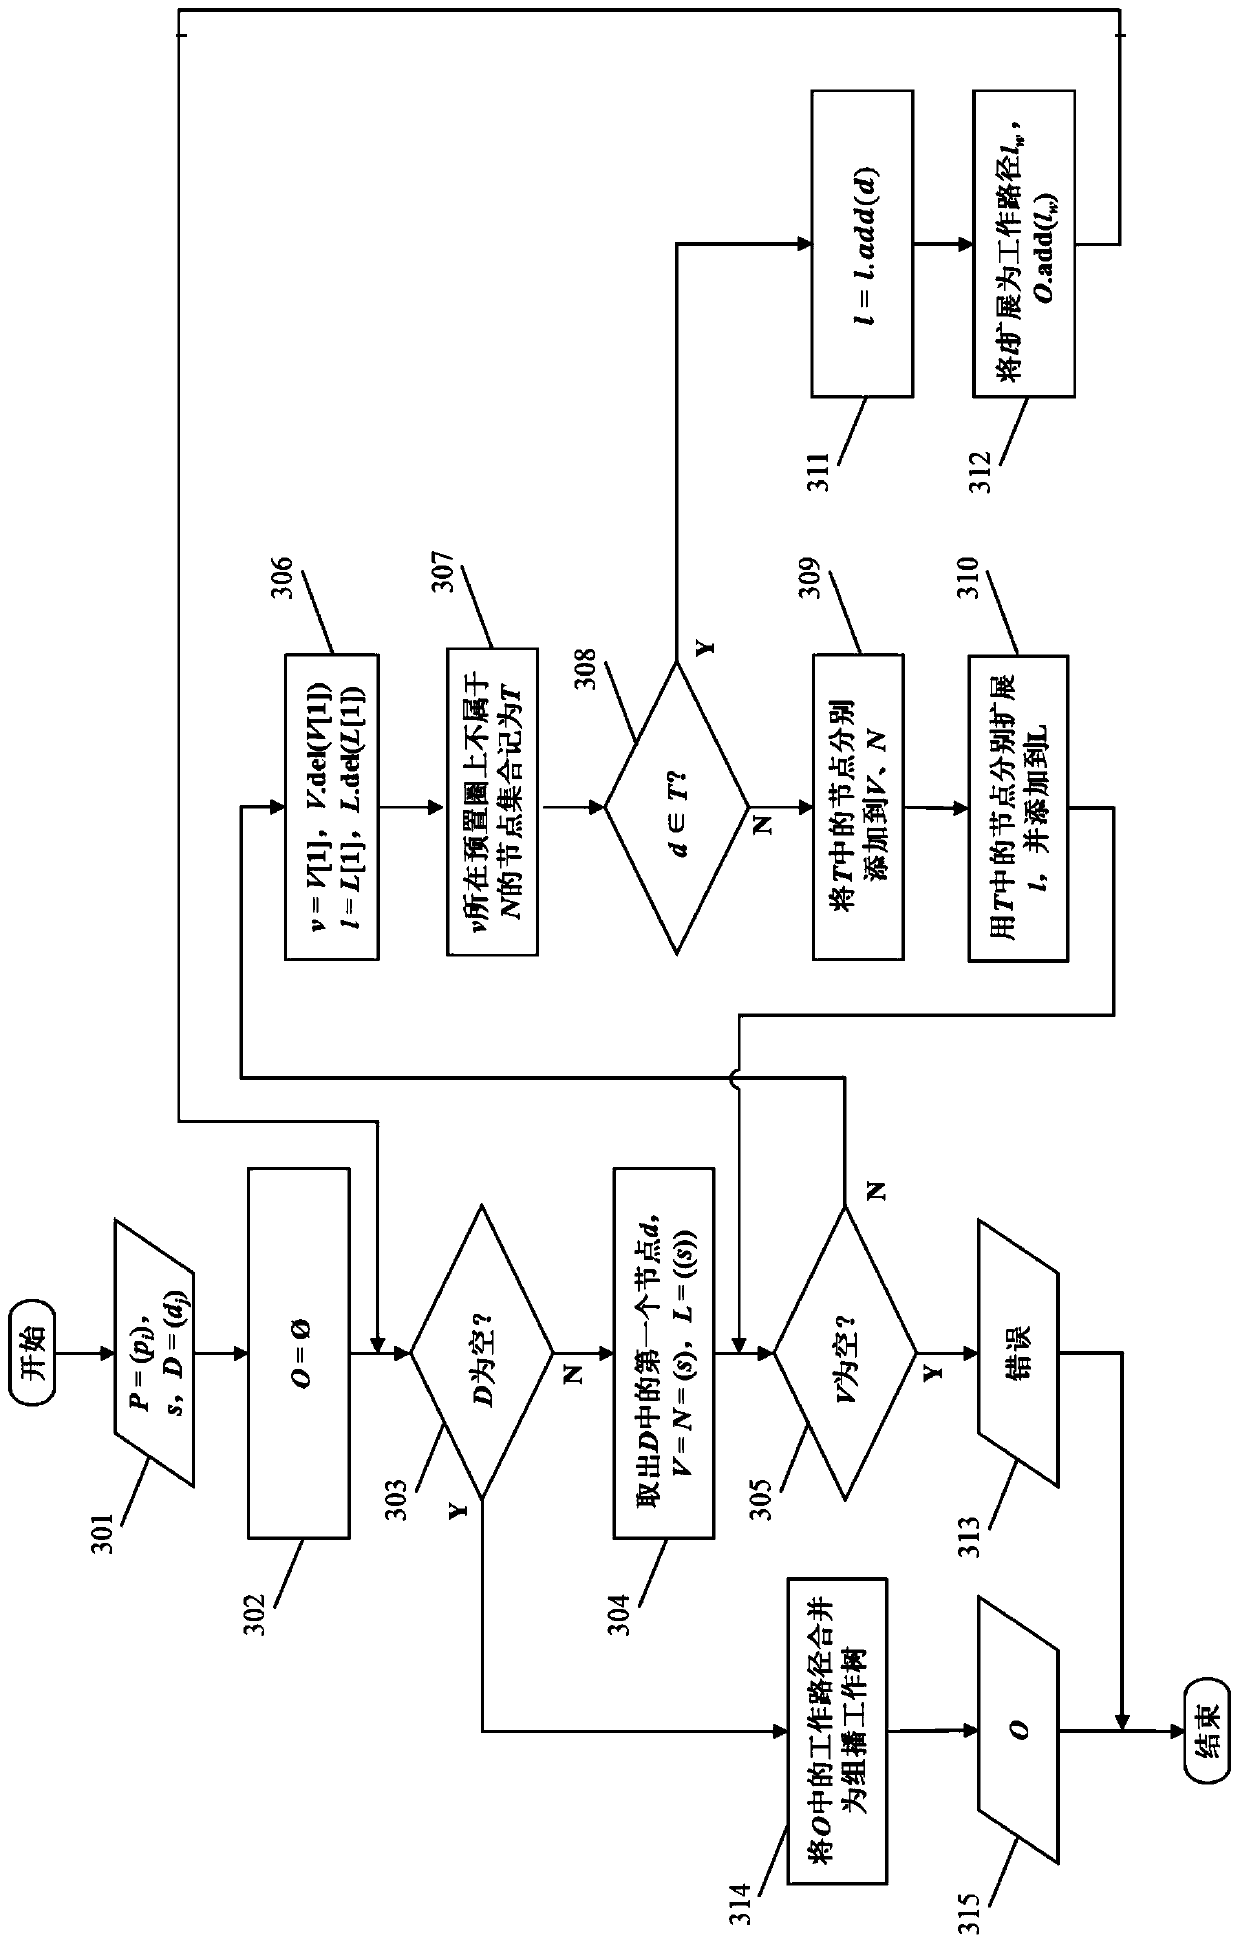 Method for presetting fail-safe path of bit index display replication multicast